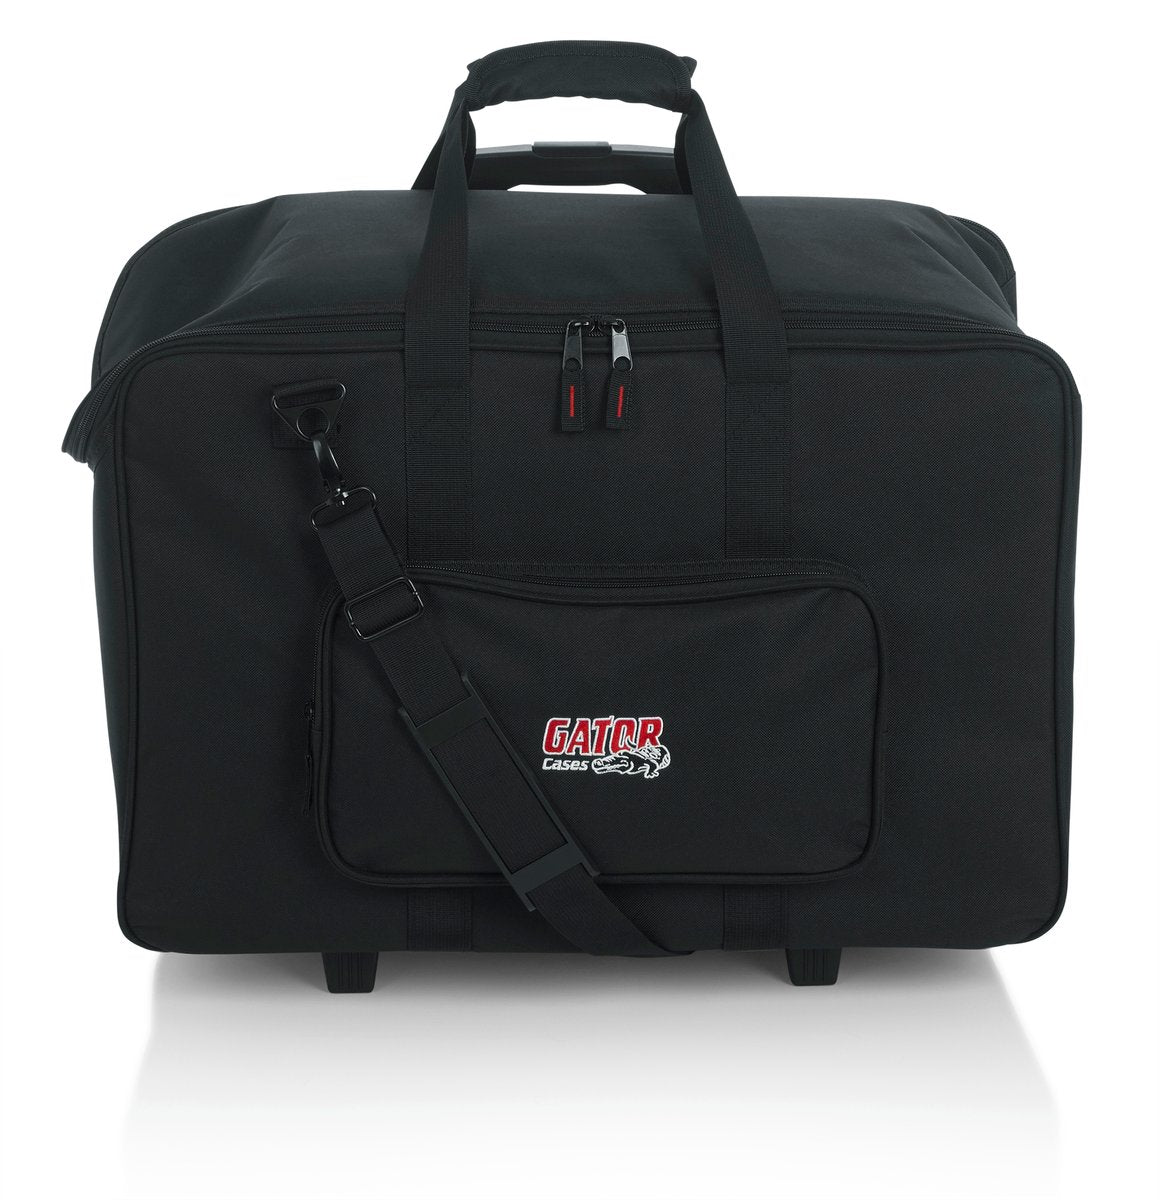 Wheeled, Lightweight Tote Bag Designed to Fit Up to Four (4) LED Style PAR Lights with Adjustable Dividers